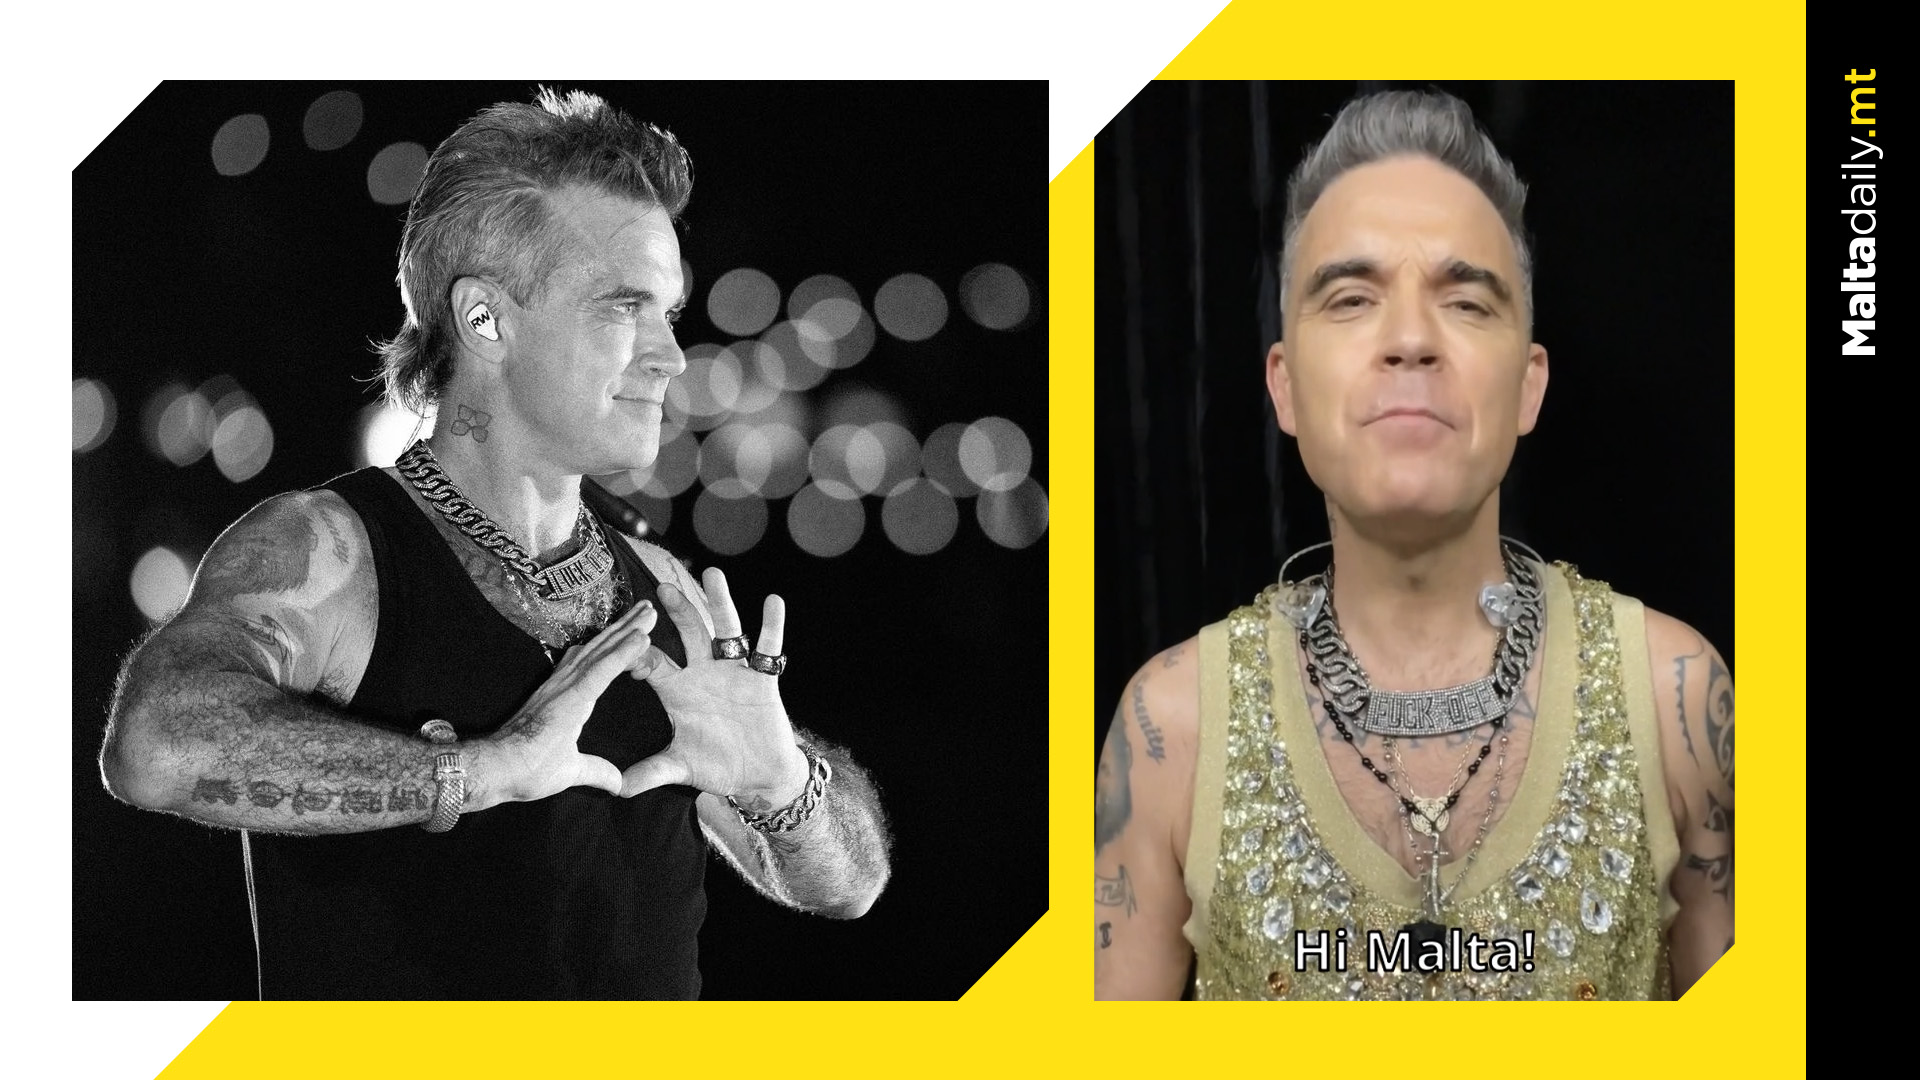 Robbie Williams tells Malta he is ready to rock Floriana's Fosos in new video